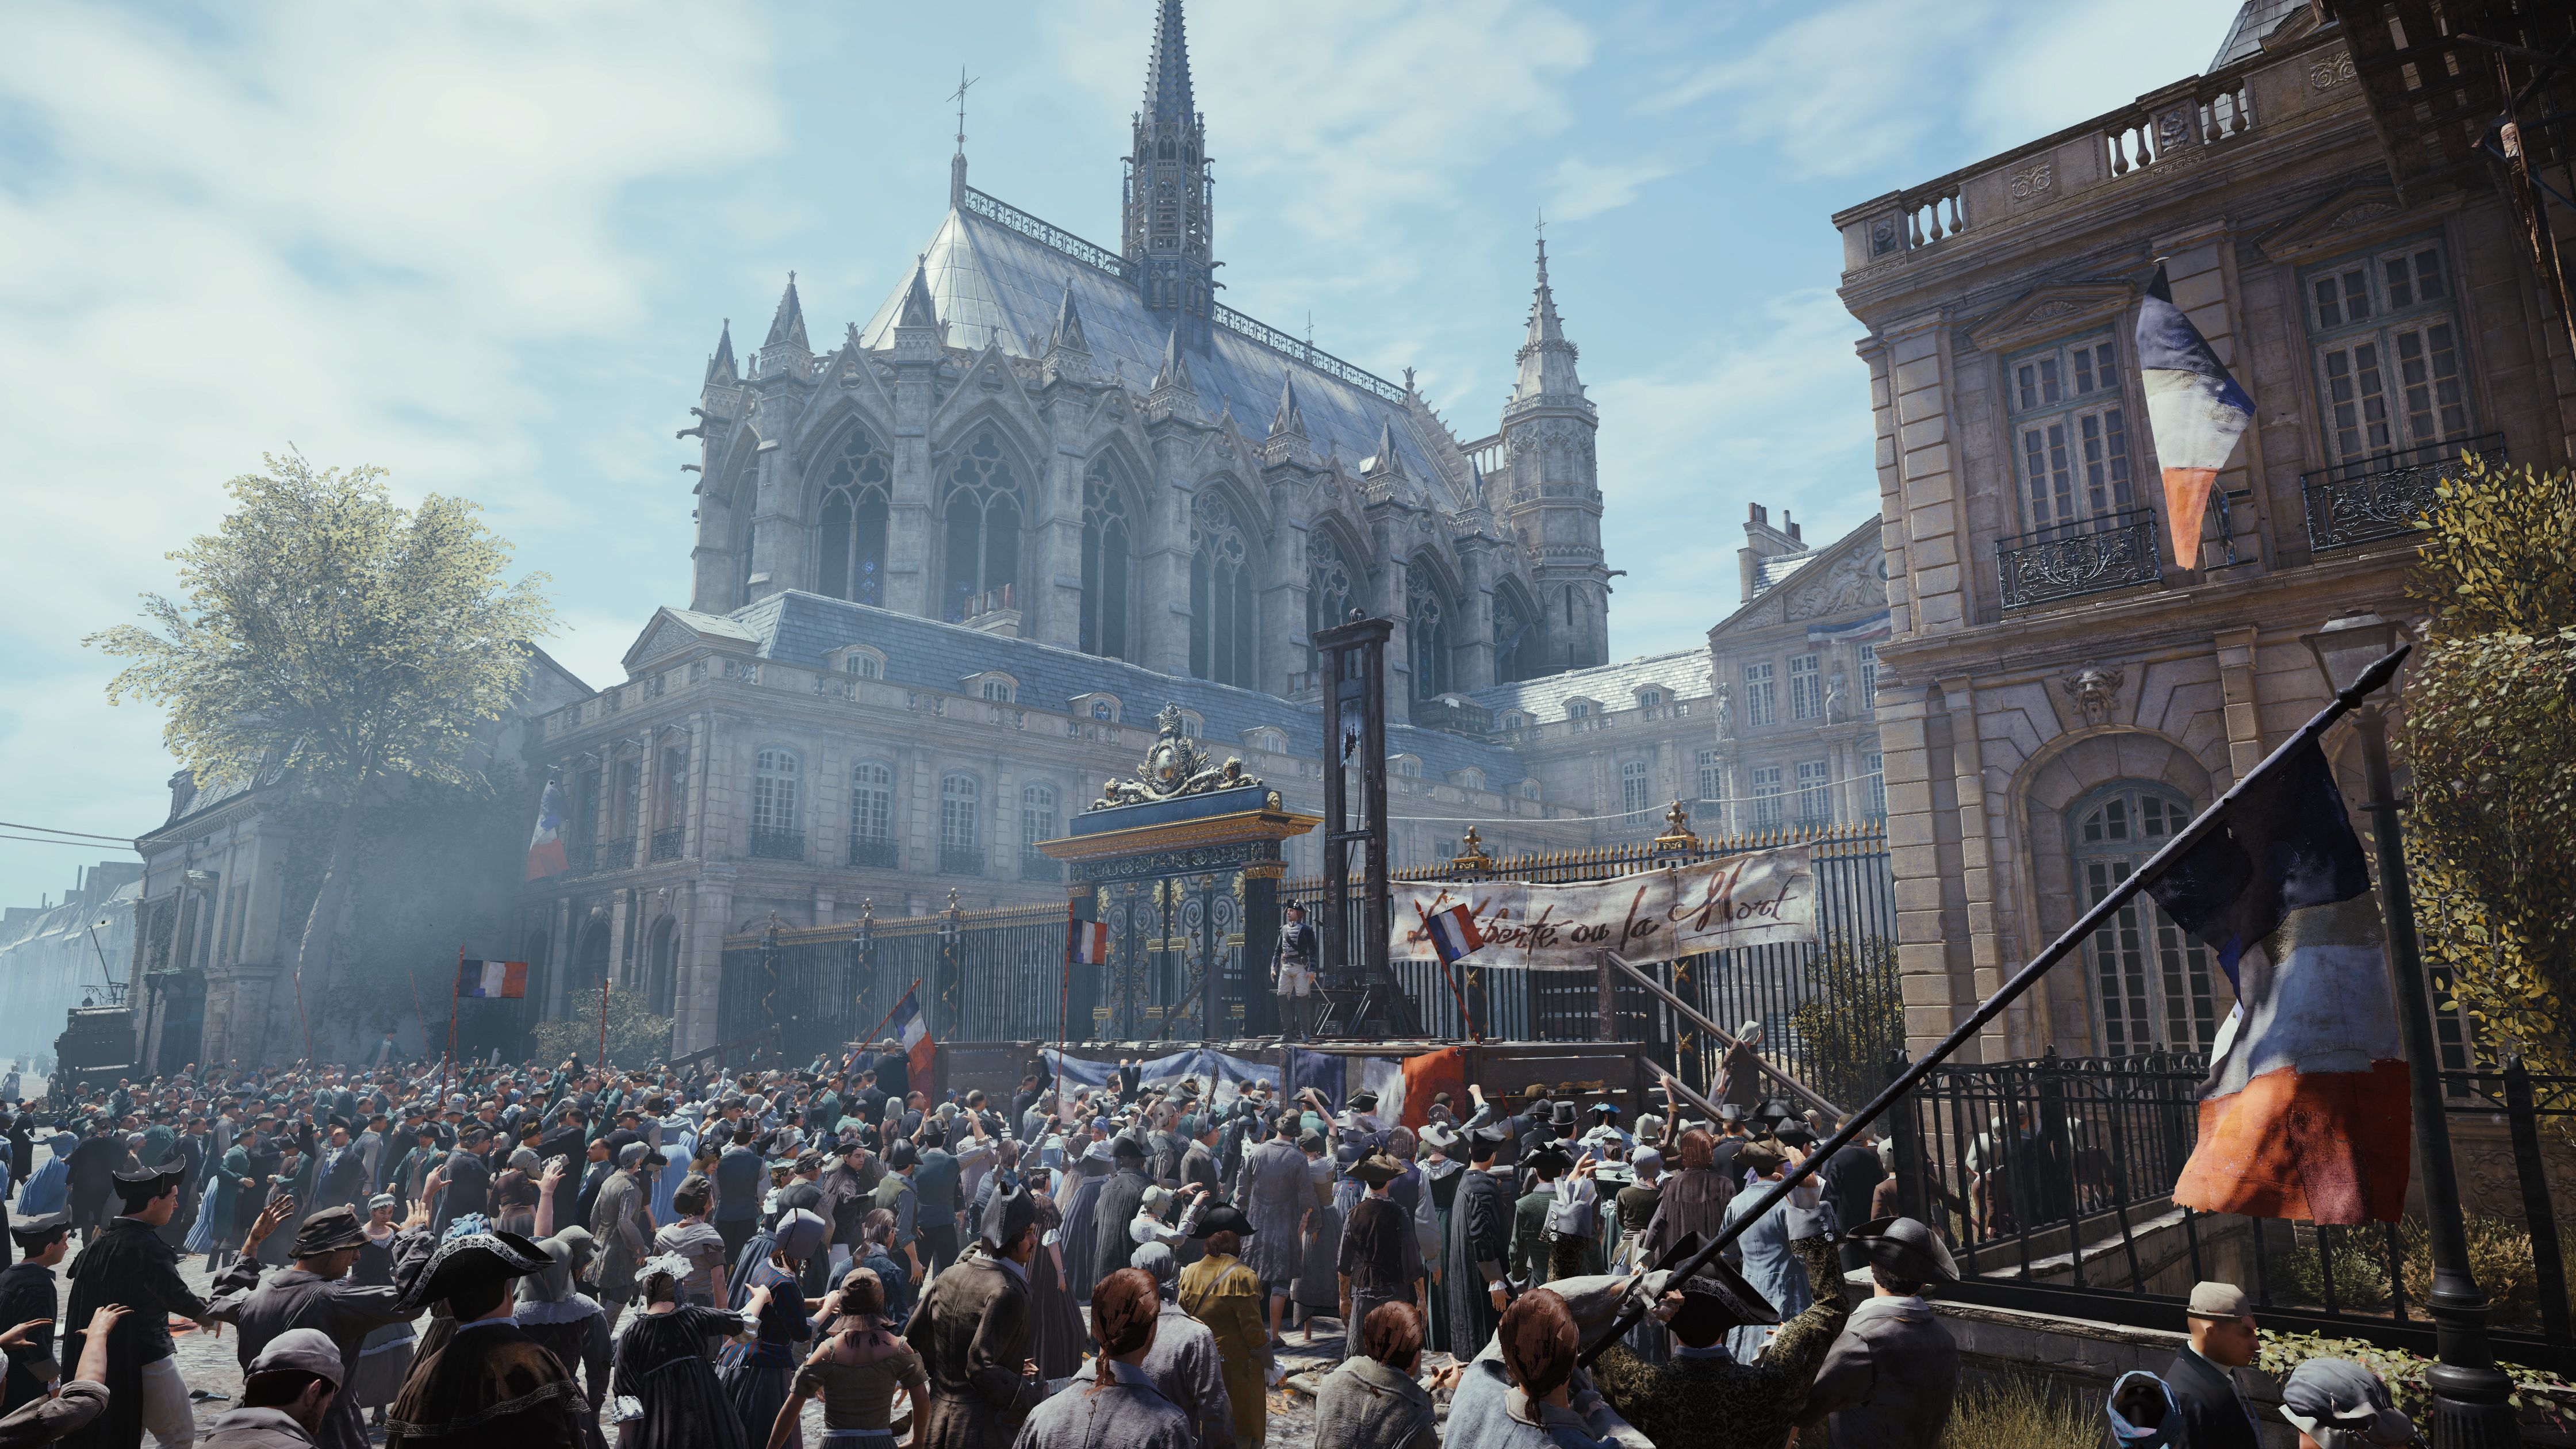 assassin s creed 5 unity preview familiar format draws upon multi player to evolve series image 13